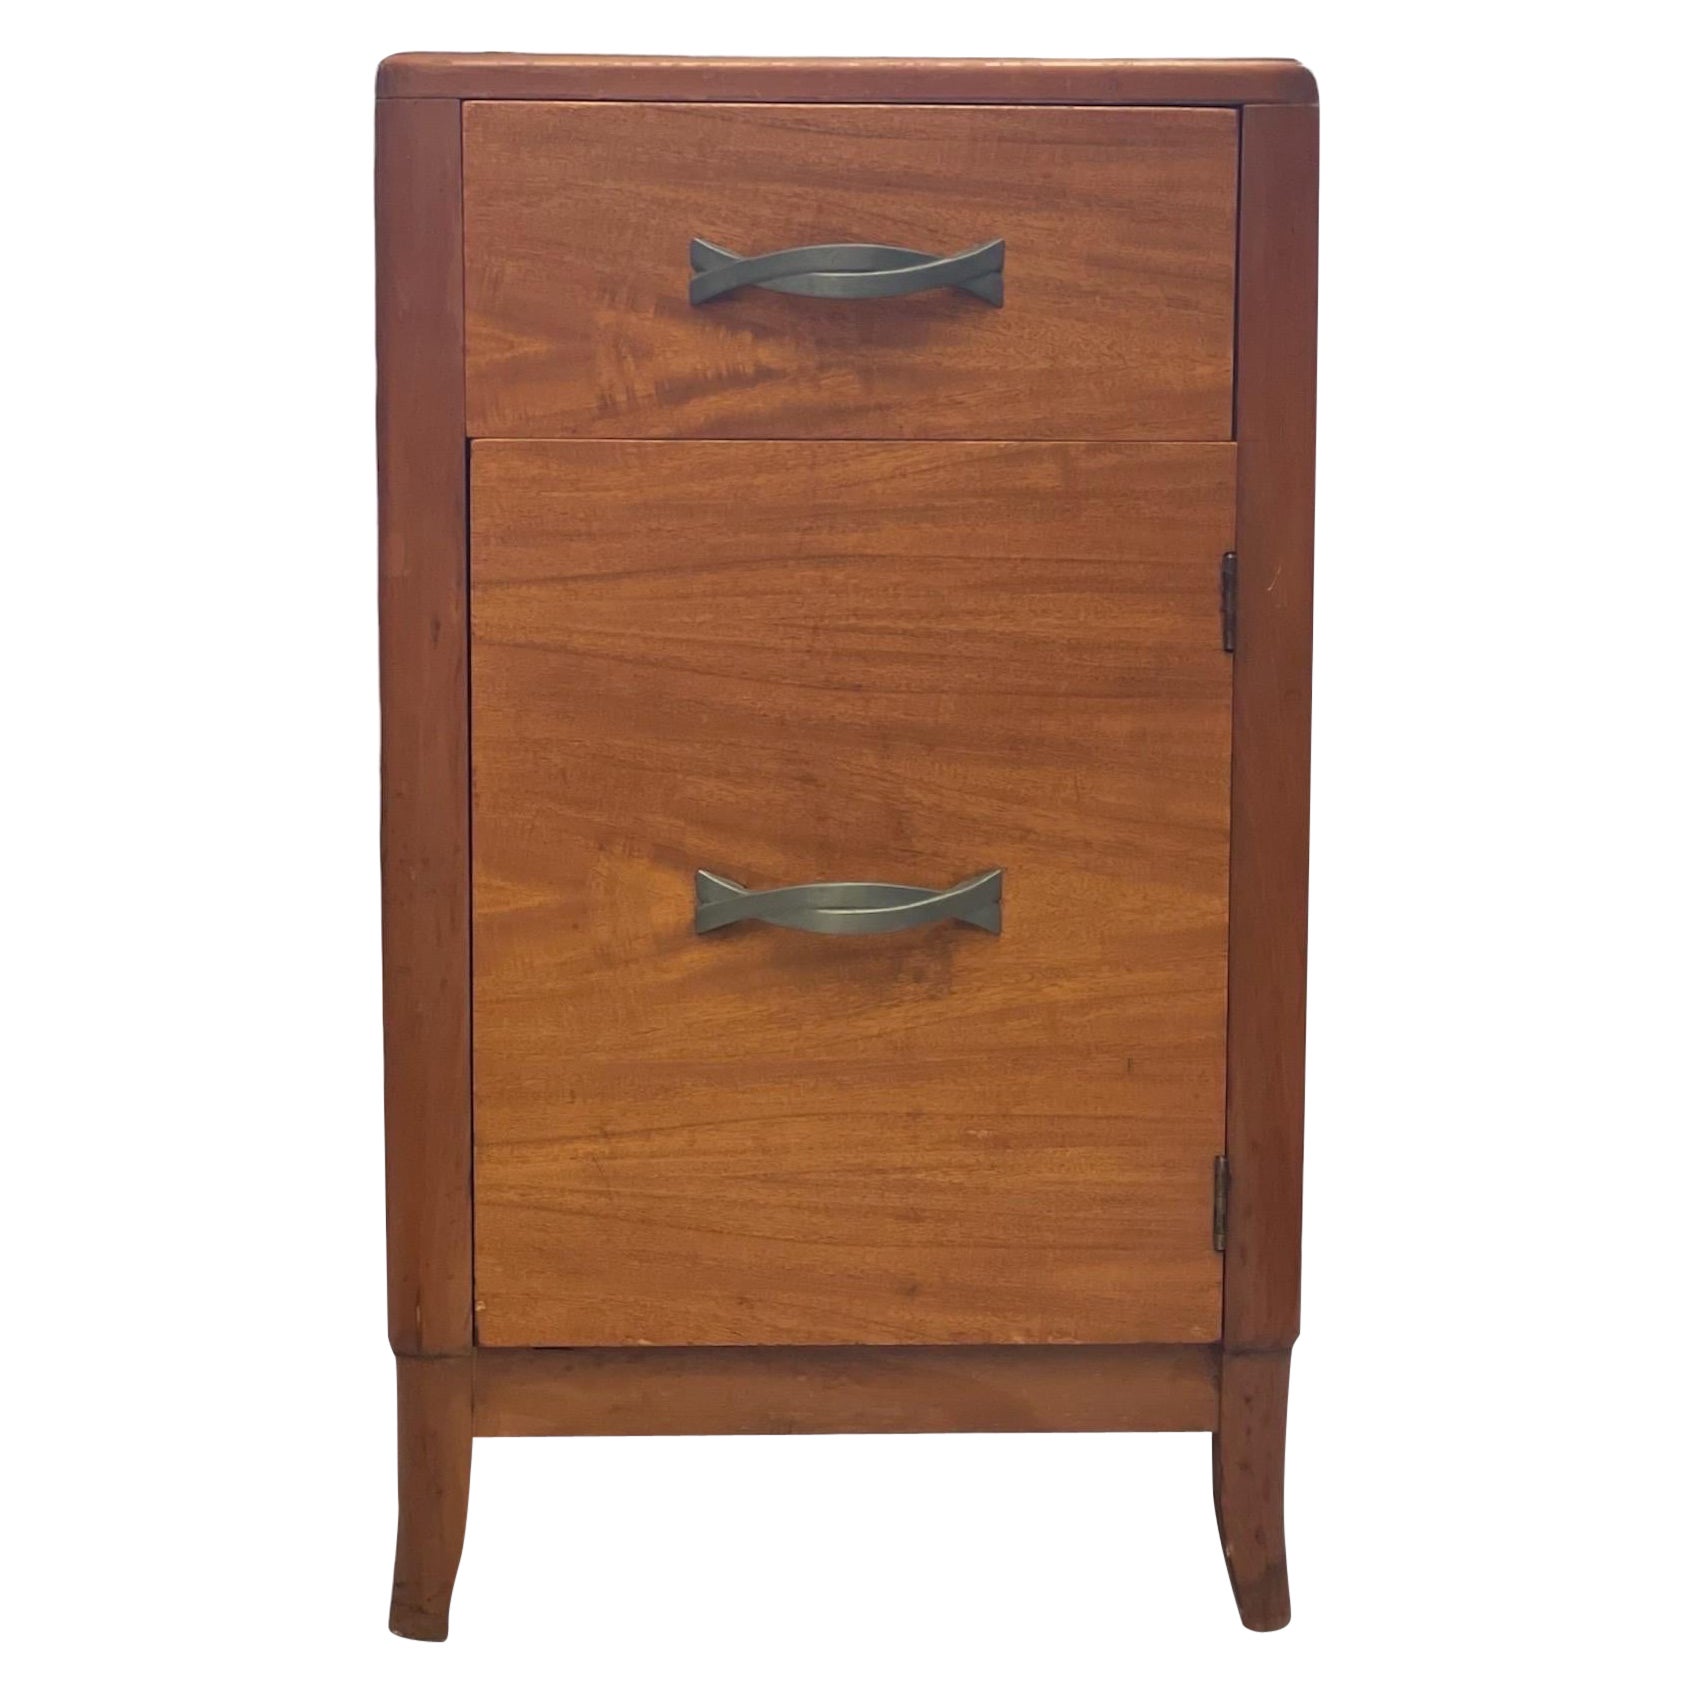 Vintage Mid-Century Modern Accent Table Dovetail Drawers Circa 1950s - 1970s. For Sale